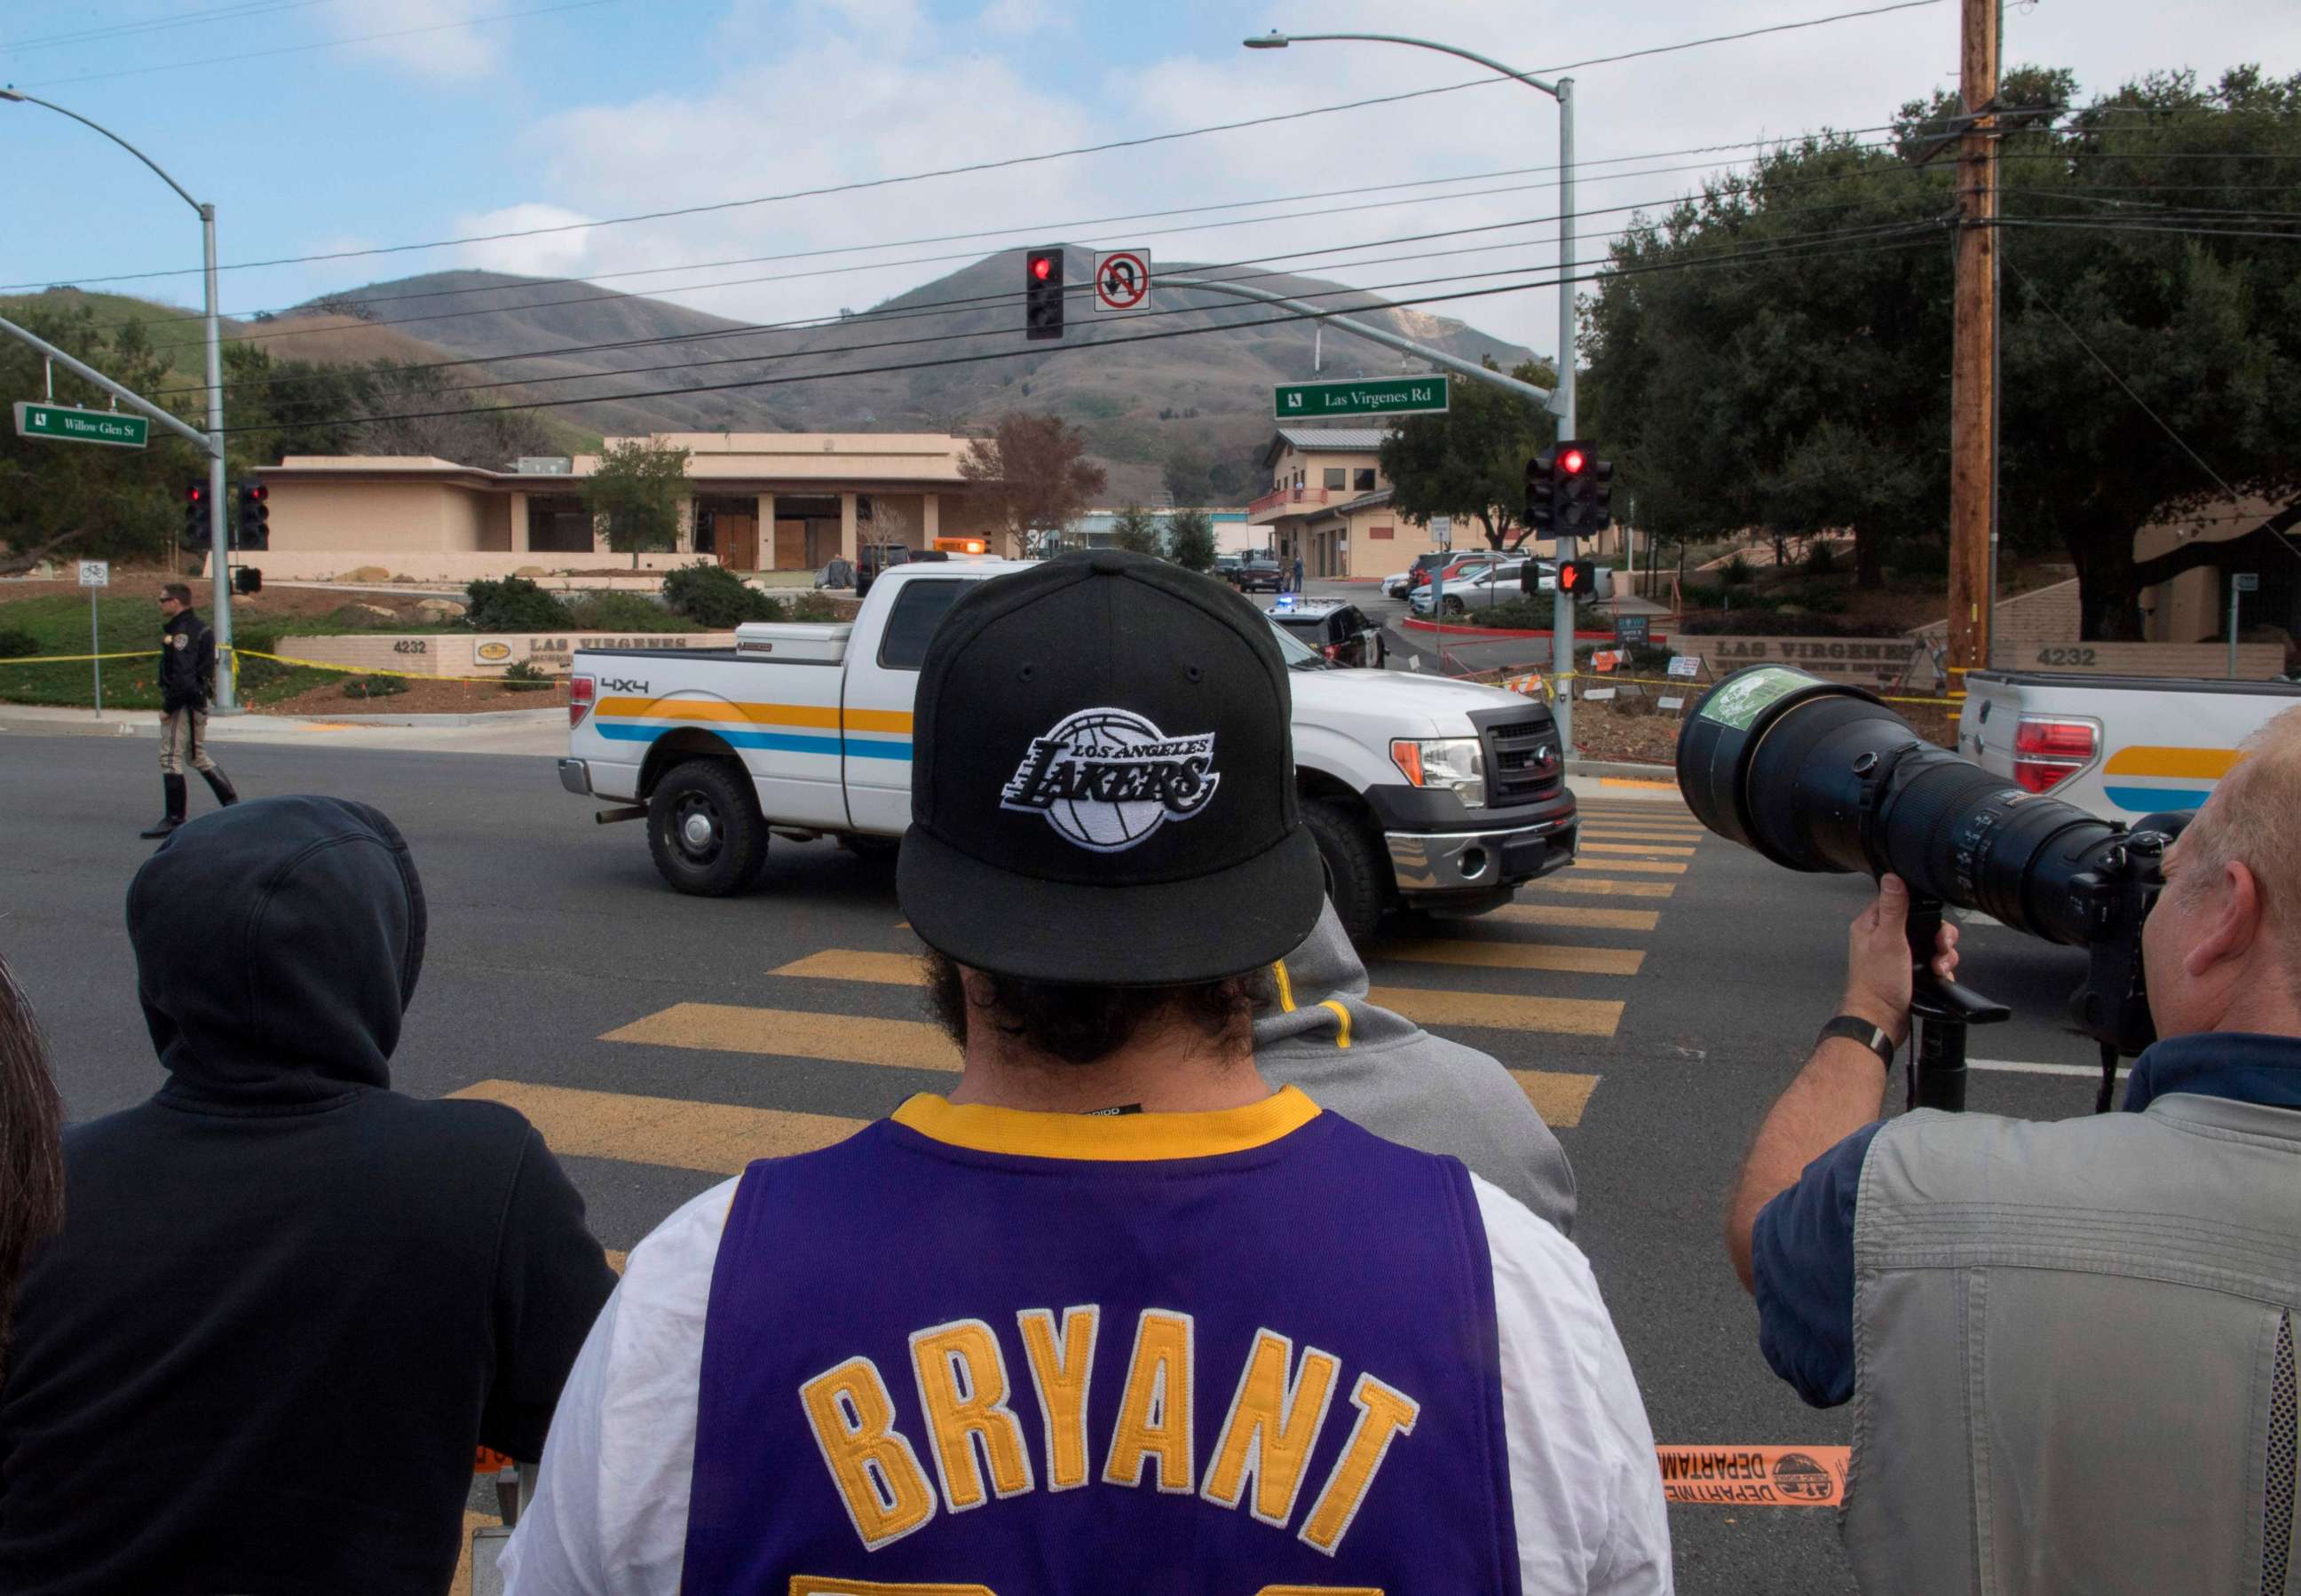 PHOTO: People gather near the scene of a helicopter crash in Calabasas on Sunday, Jan. 26, 2020, that killed nine people, including former Los Angeles Lakers star Kobe Bryant and his daughter, Gianna Maria.